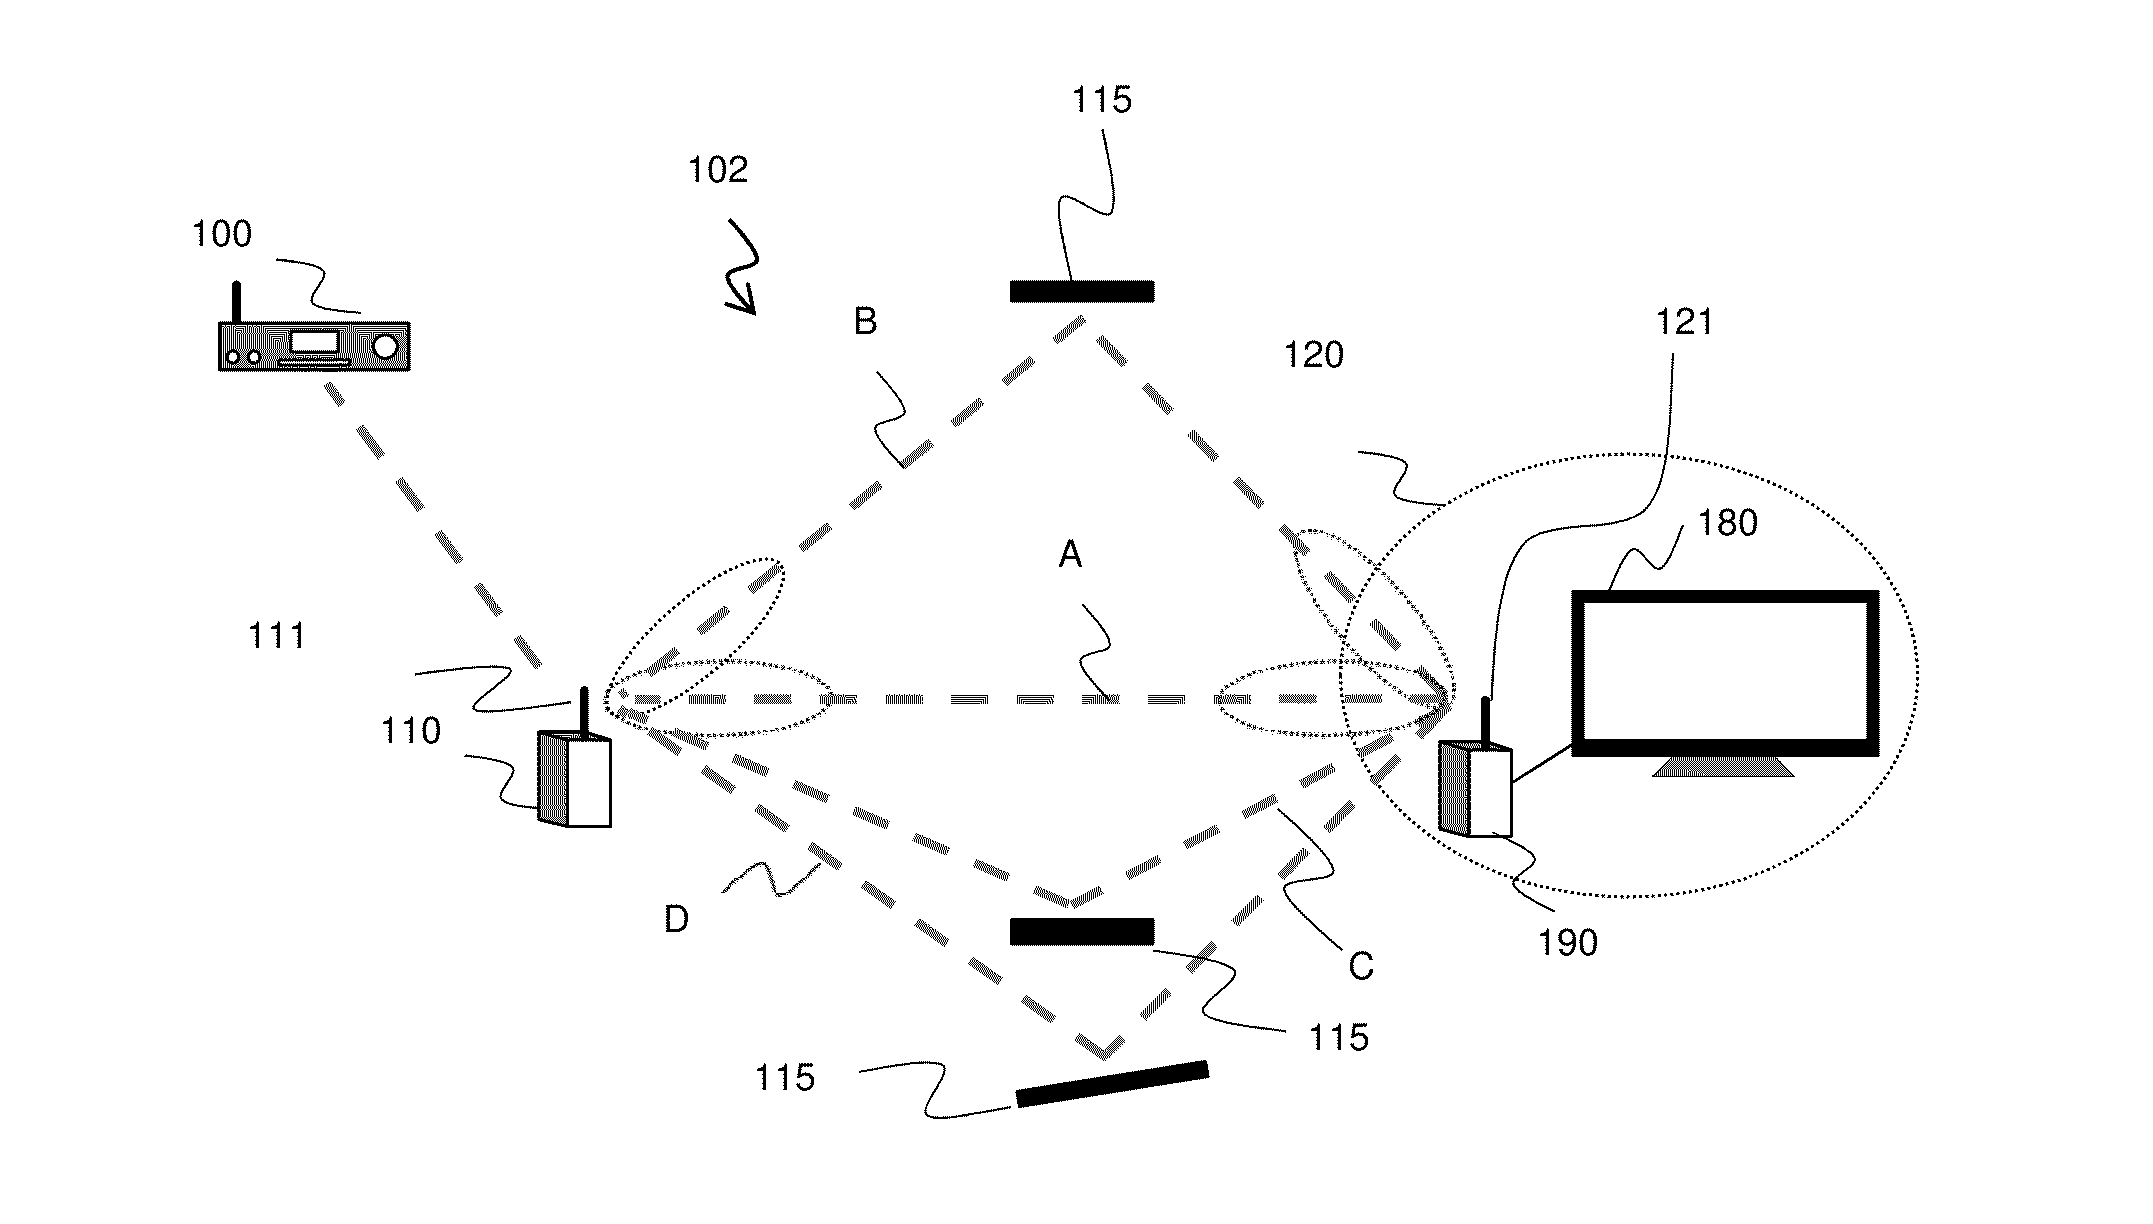 Methods and devices for transmitting and receiving data signals in a wireless network over a plurality of transmission paths